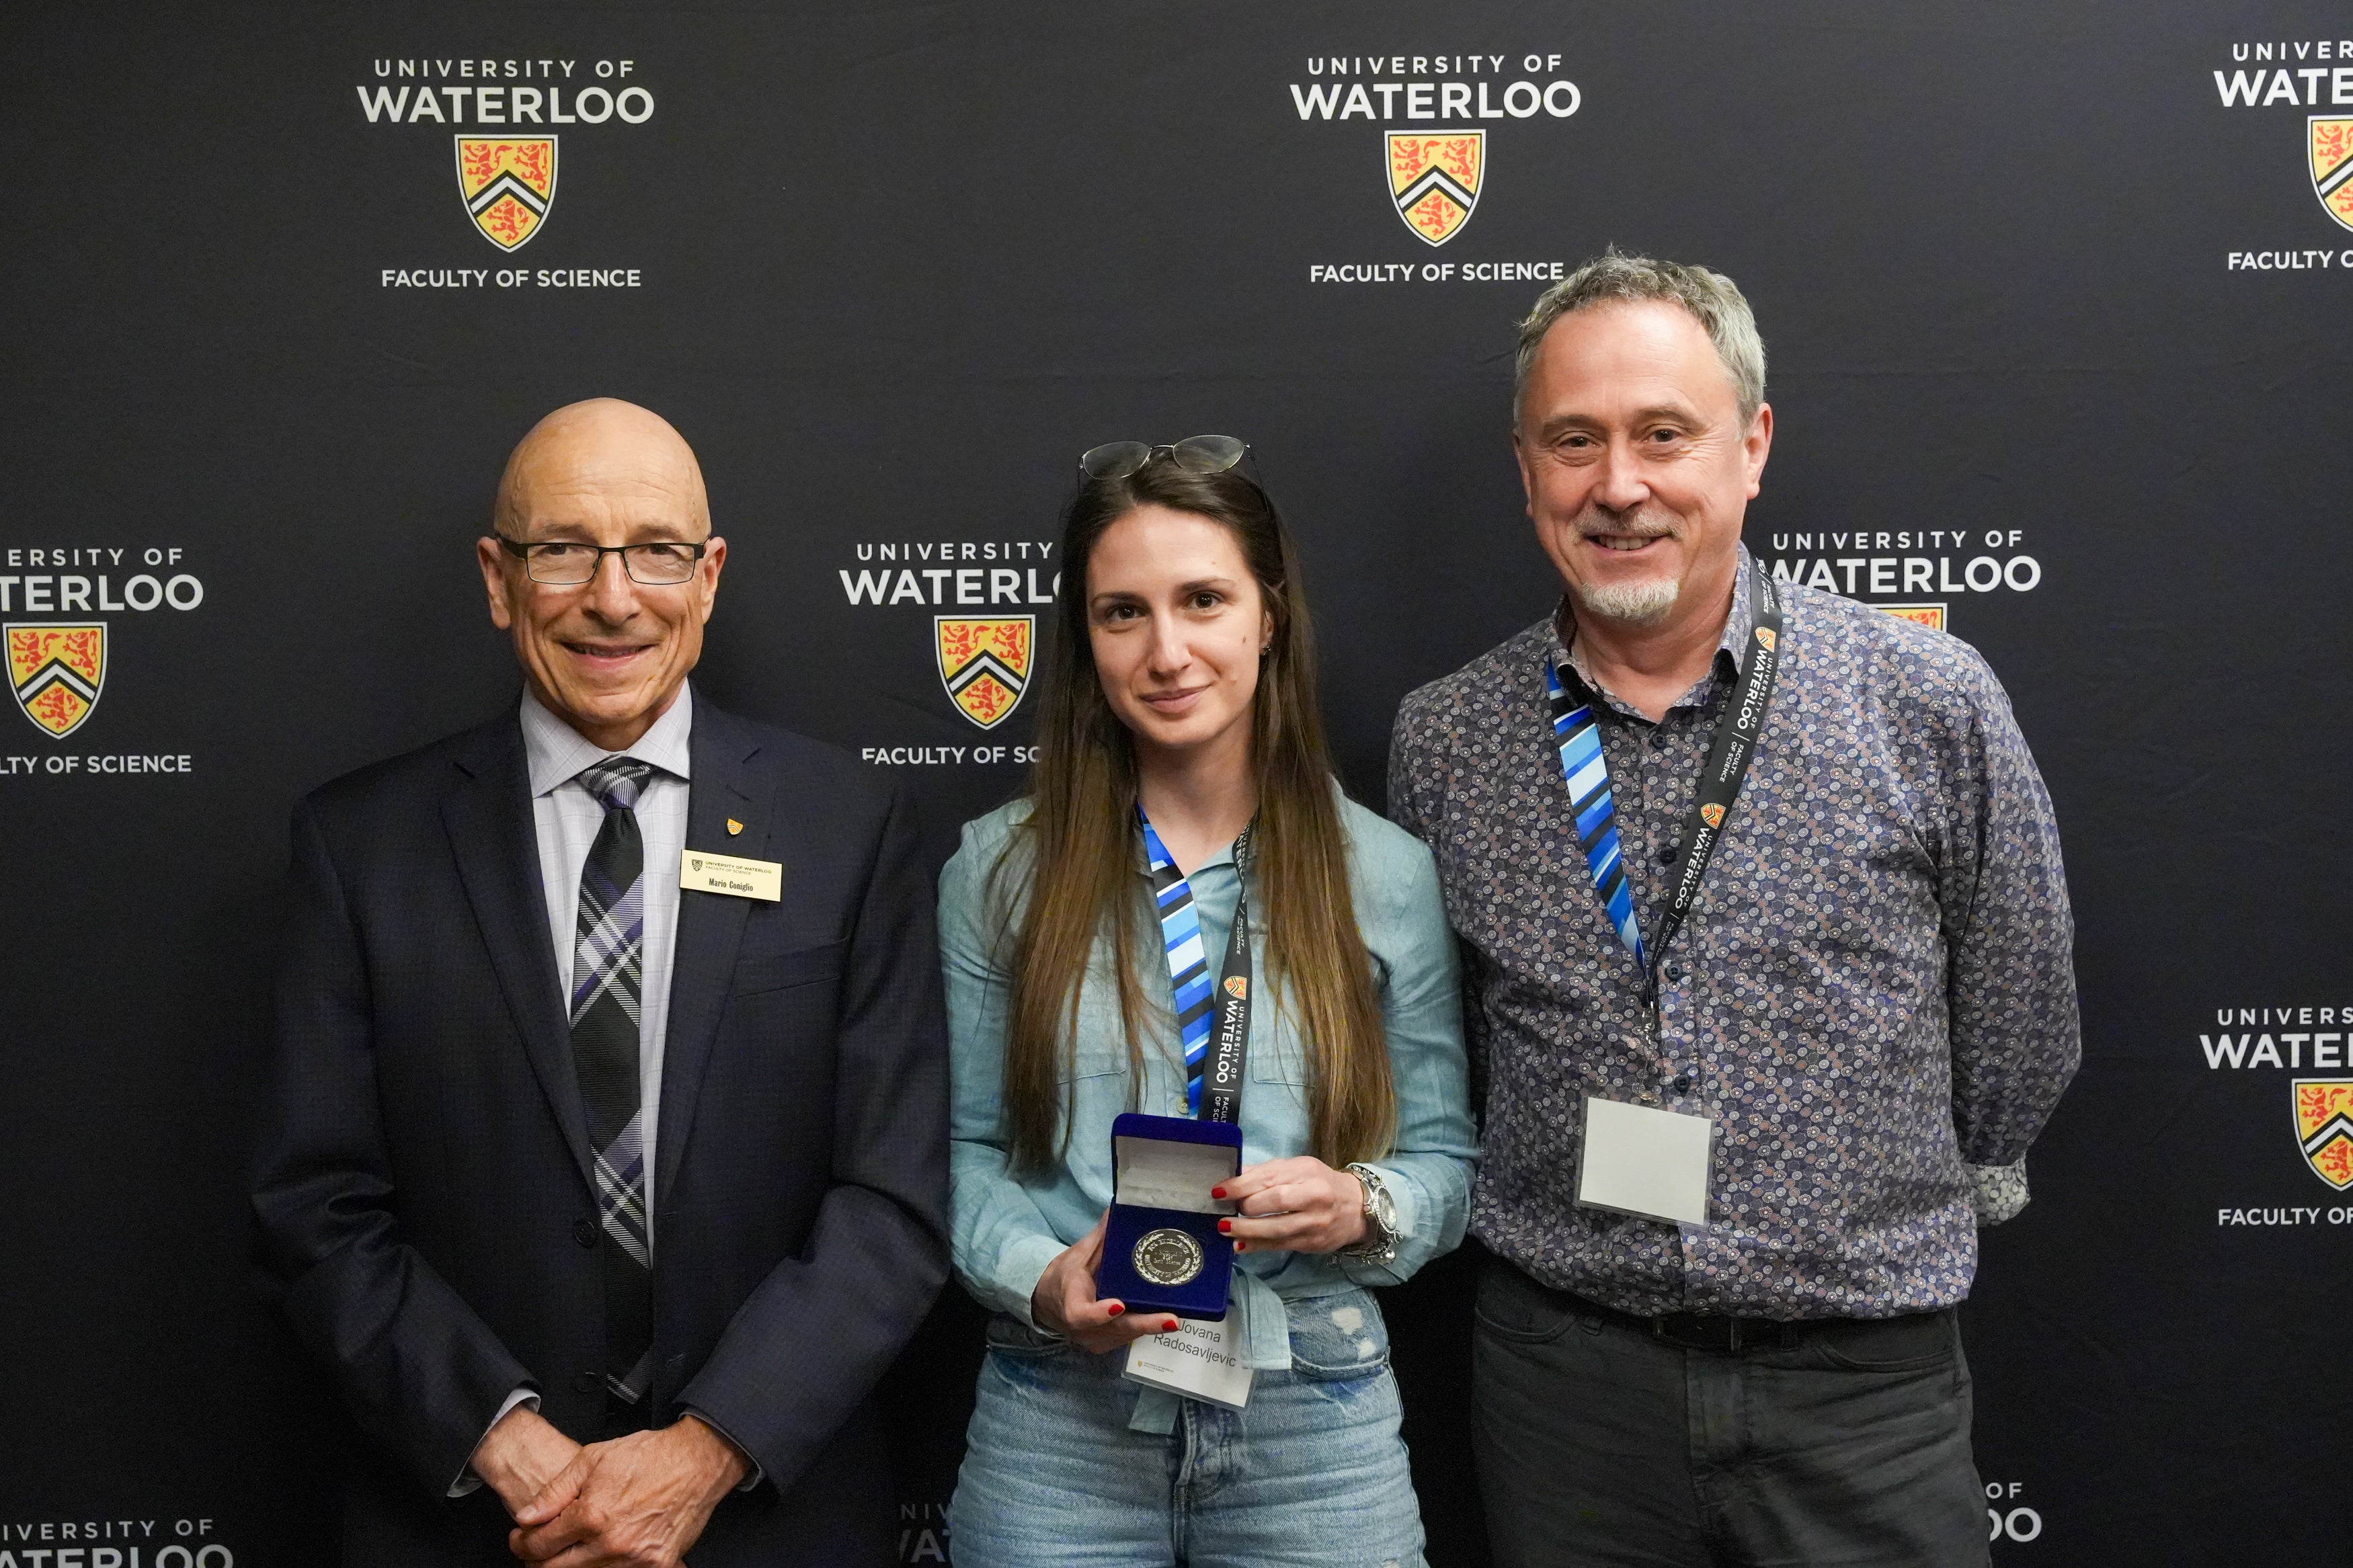 Two men and a woman standing against a black background printed with the University of Waterloo logo. The woman is holding a medal.